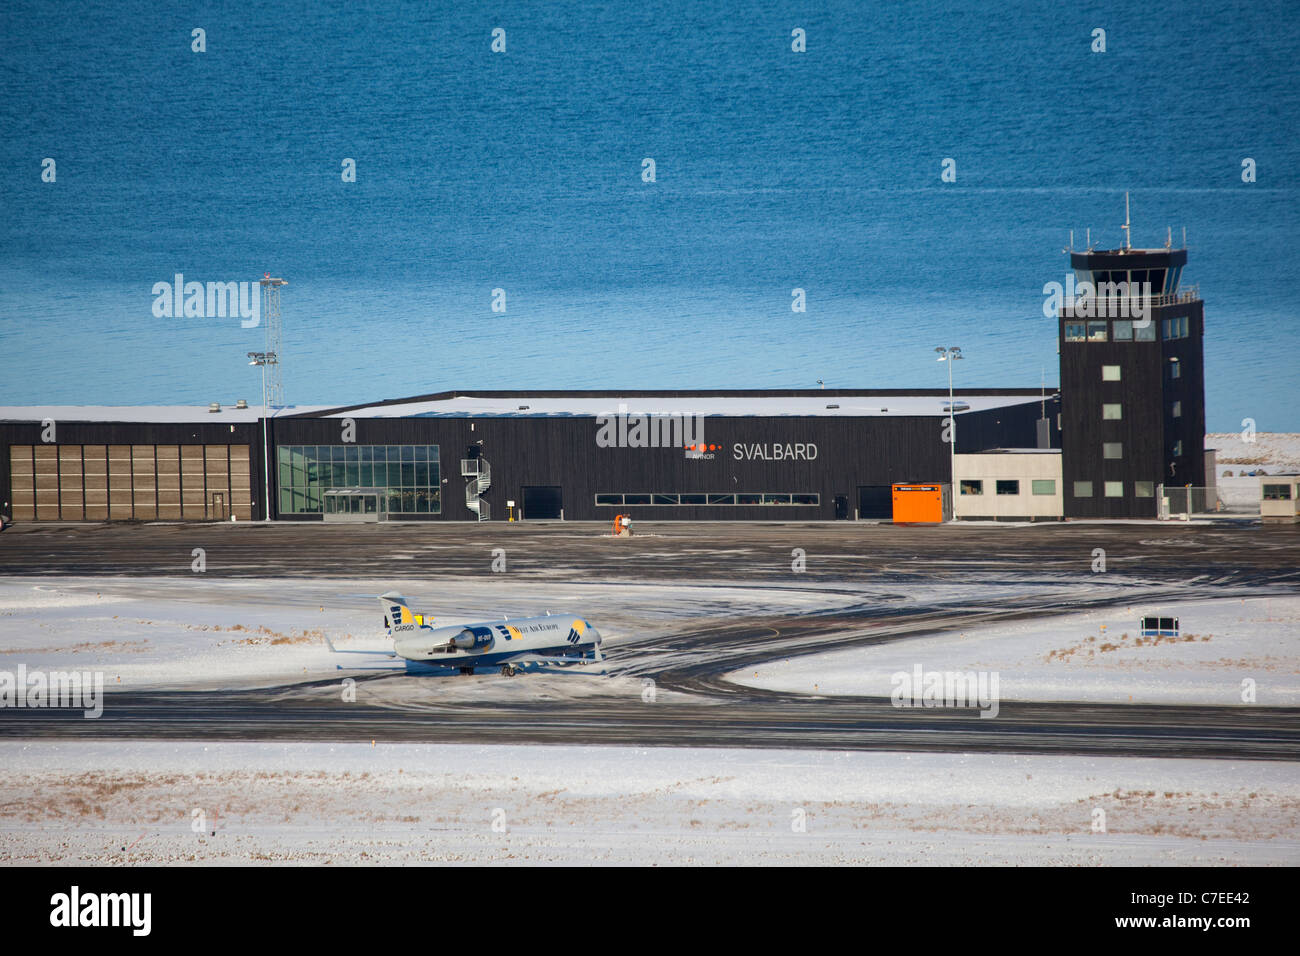 West Air Europe plane arriving at Longyearbyen Airport, on the Arctic island of Spitsbergen, Svalbard. Stock Photo